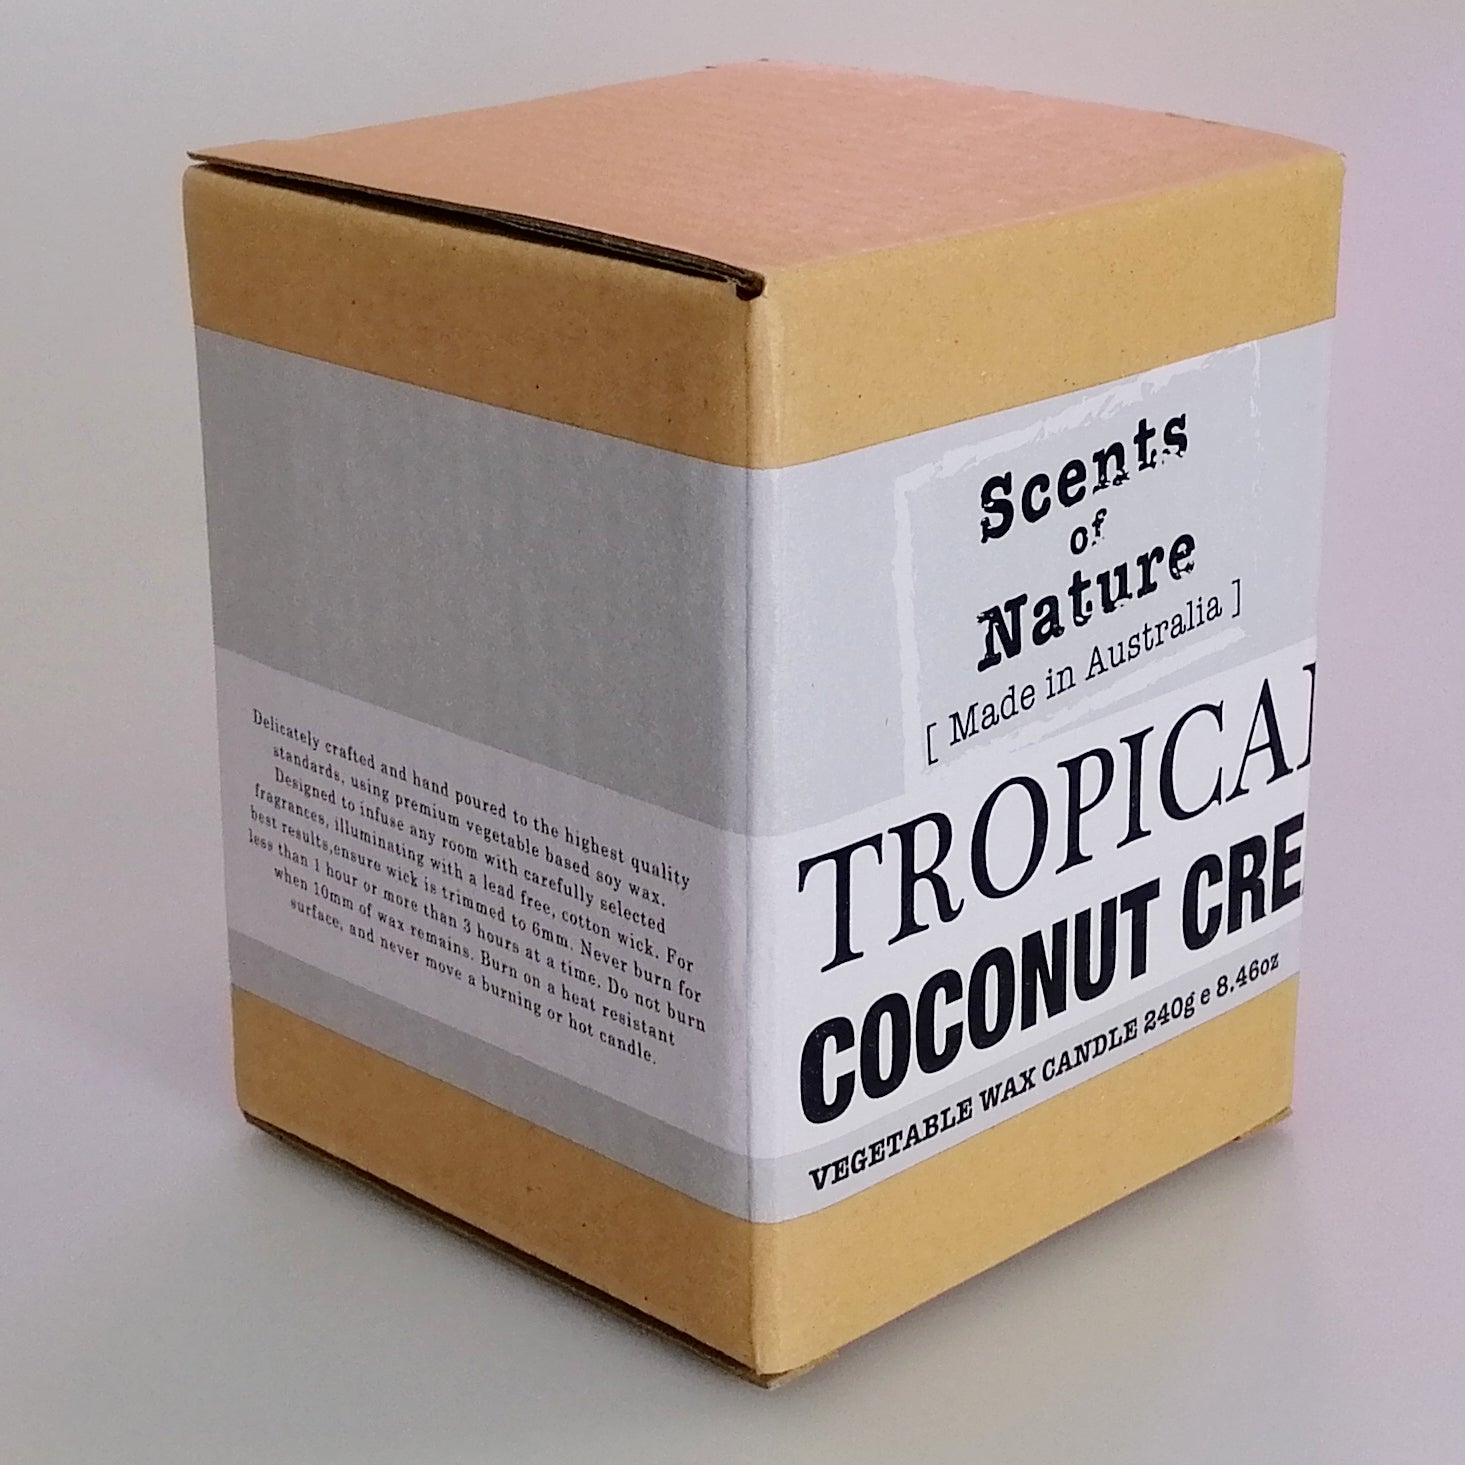 Vegetable Wax Candle - Tropical Coconut Cream - 240g